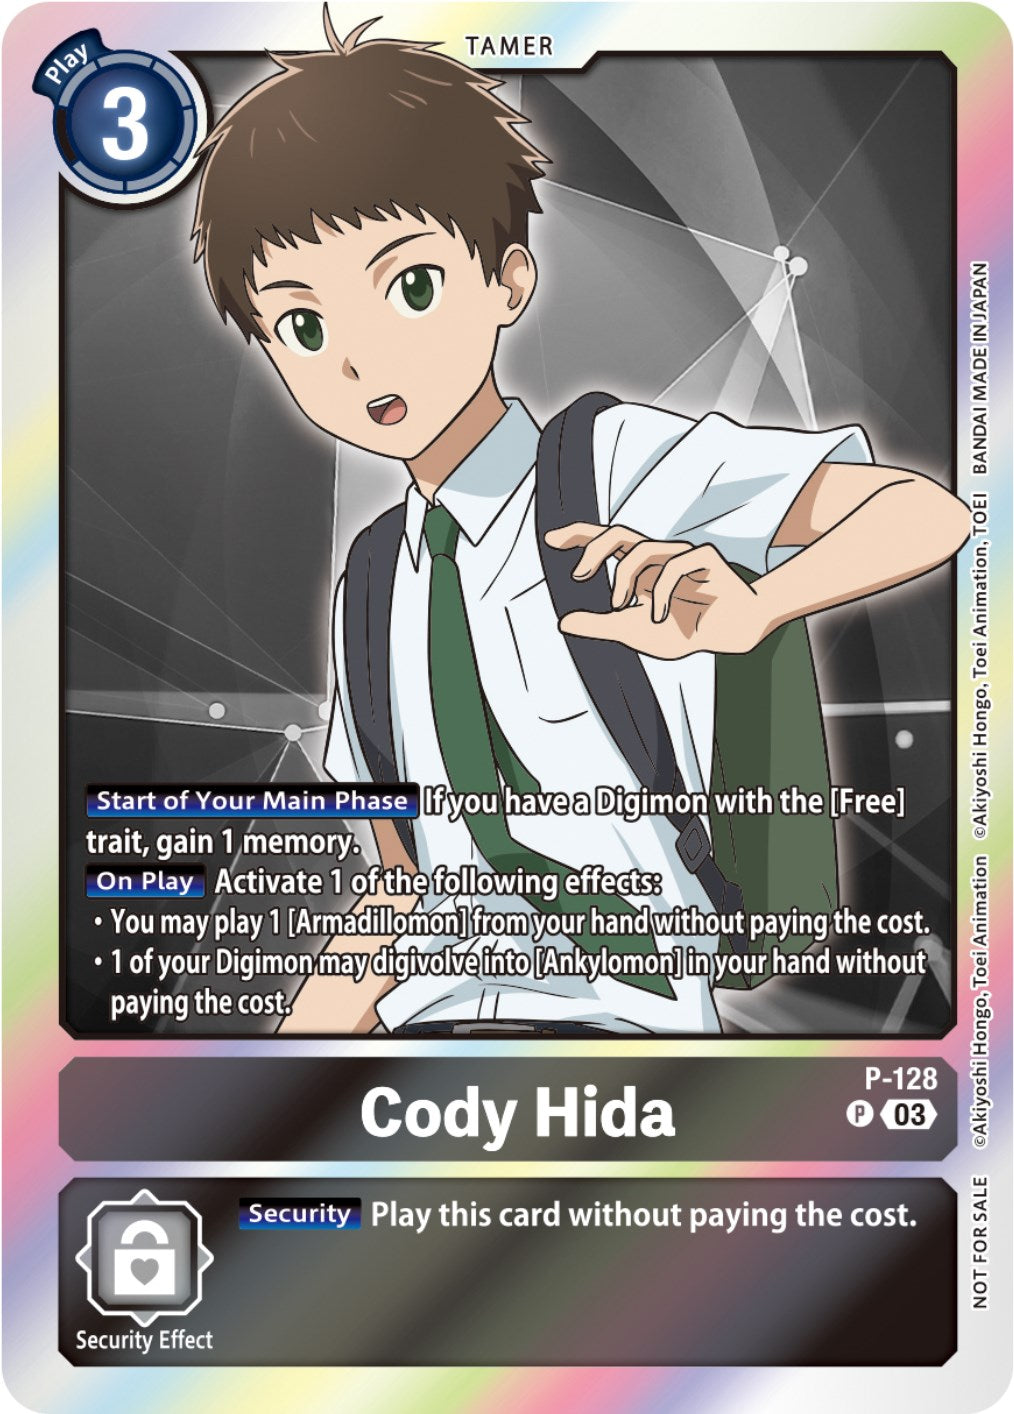 Cody Hida [P-128] (Tamer Party Pack -The Beginning- Ver. 2.0) [Promotional Cards] | Shuffle n Cut Hobbies & Games